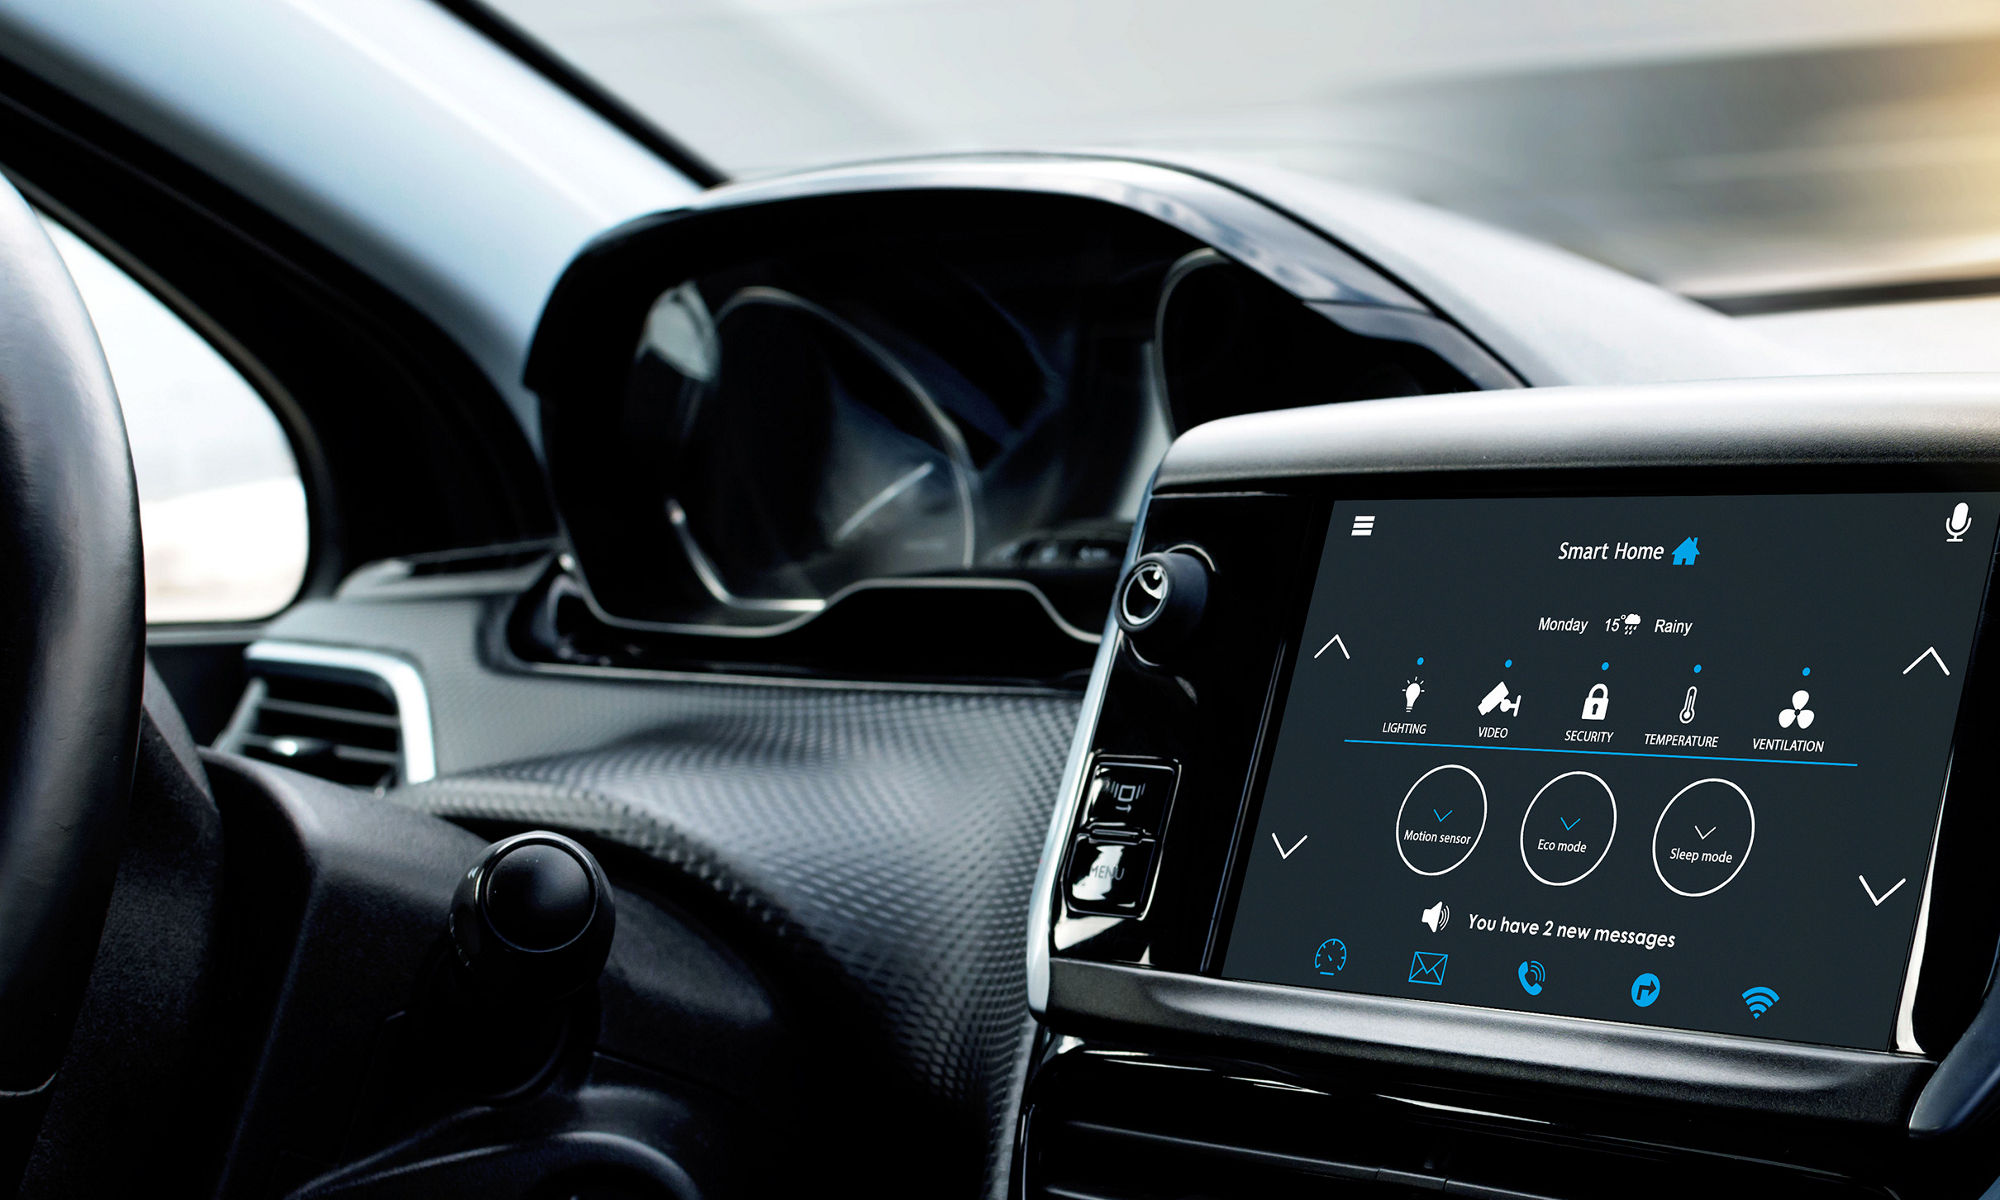 Control home temperature and security with smart home app in-car display. Home temperature, safety and environment